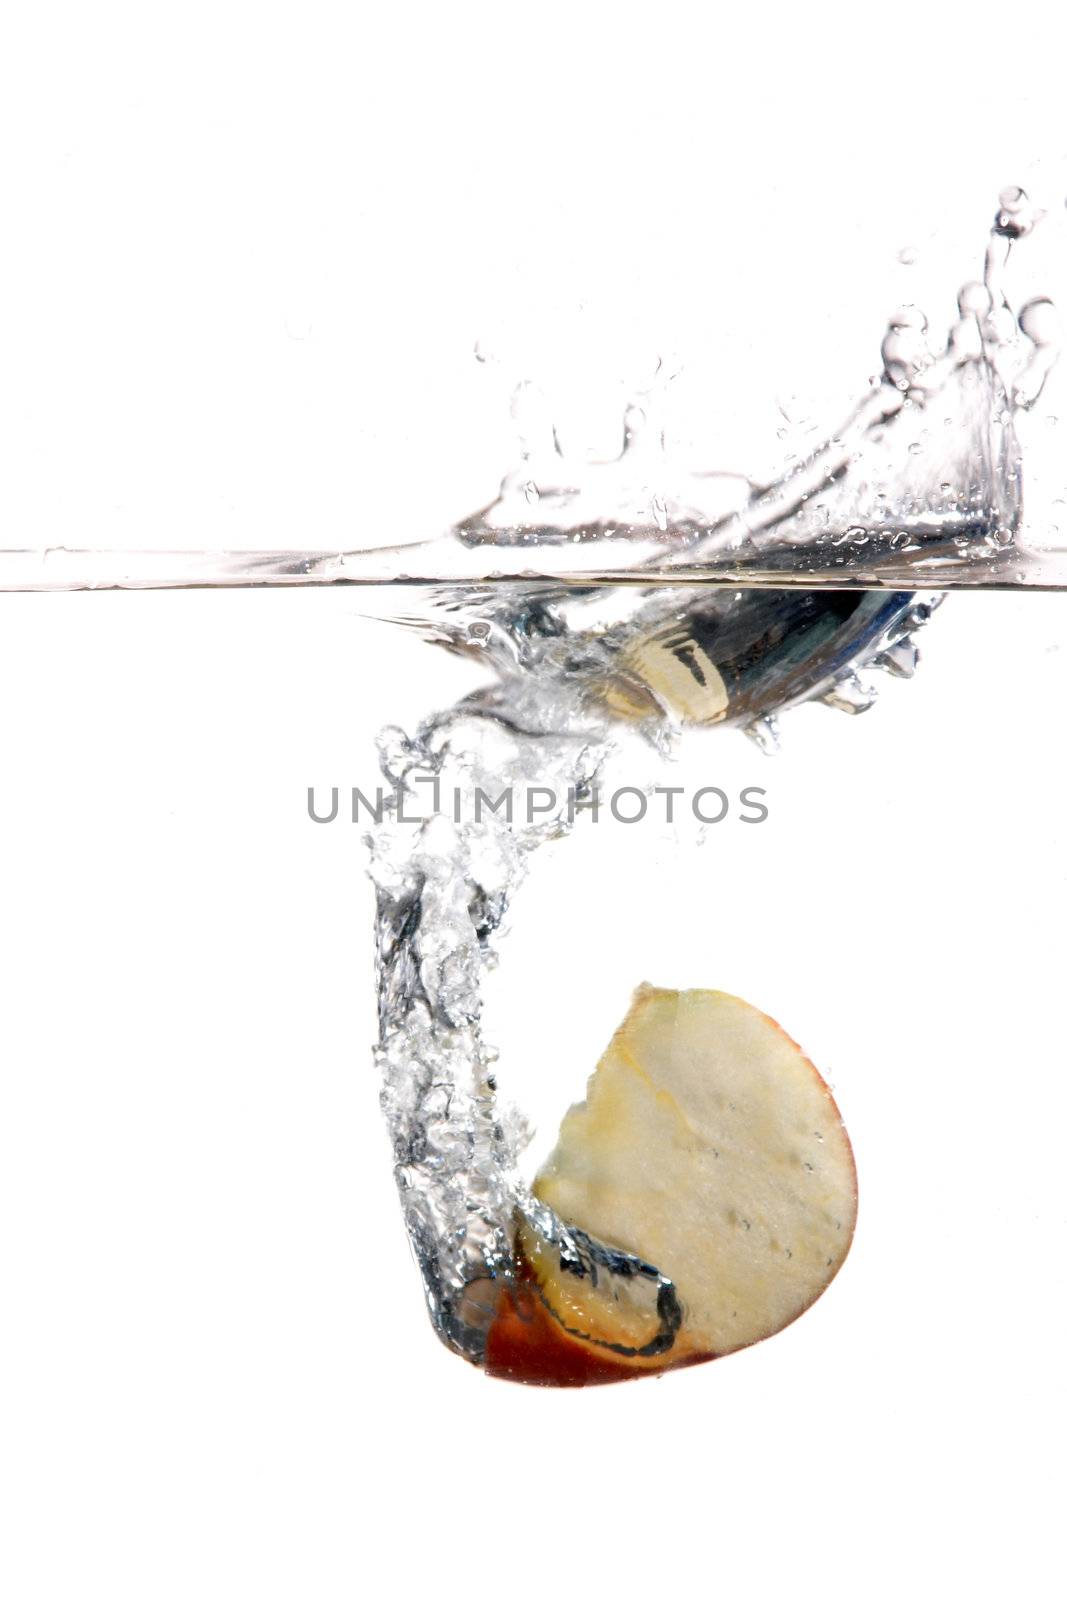 An image of slice of apple in water